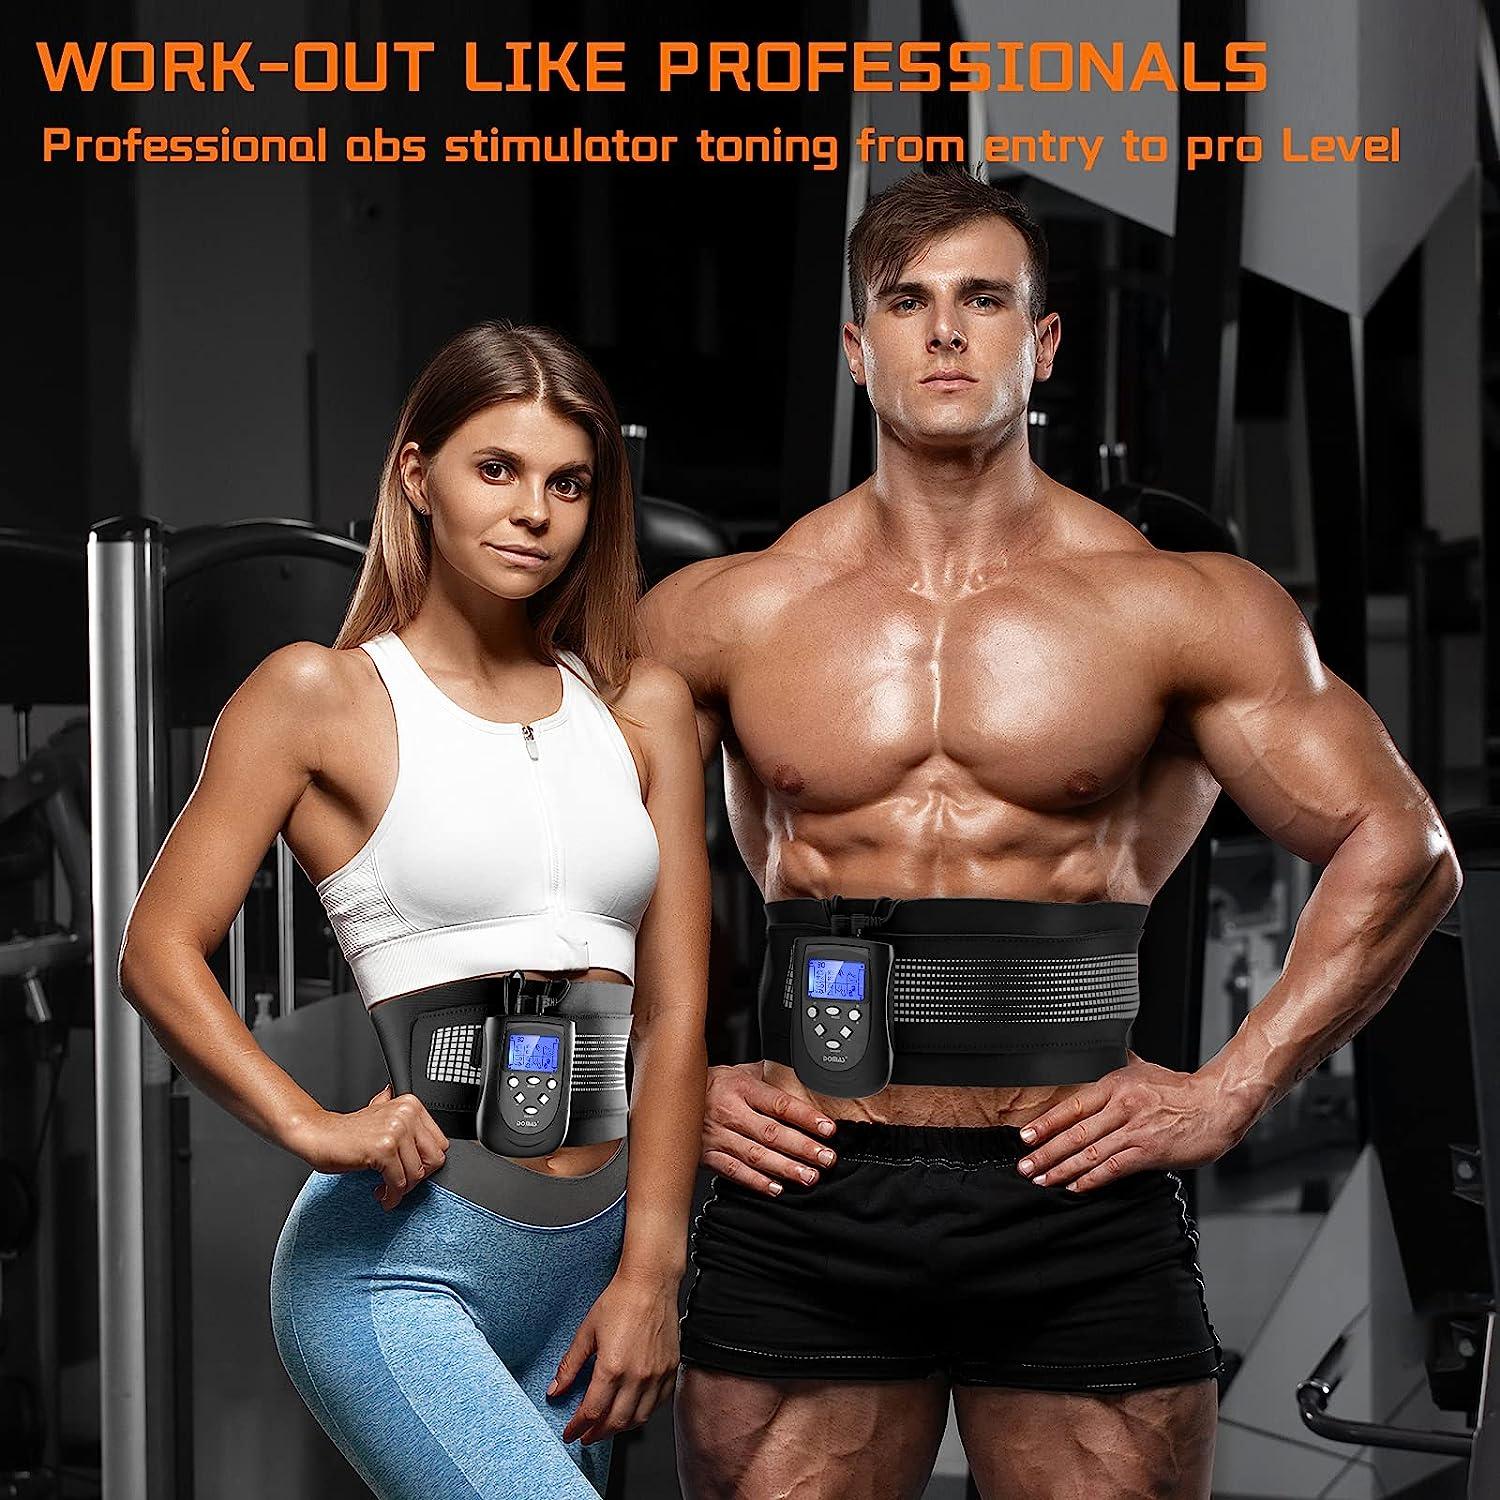 DOMAS Ab Belt Abdominal Muscle Toner- Abs Stimulator with 8 Modes